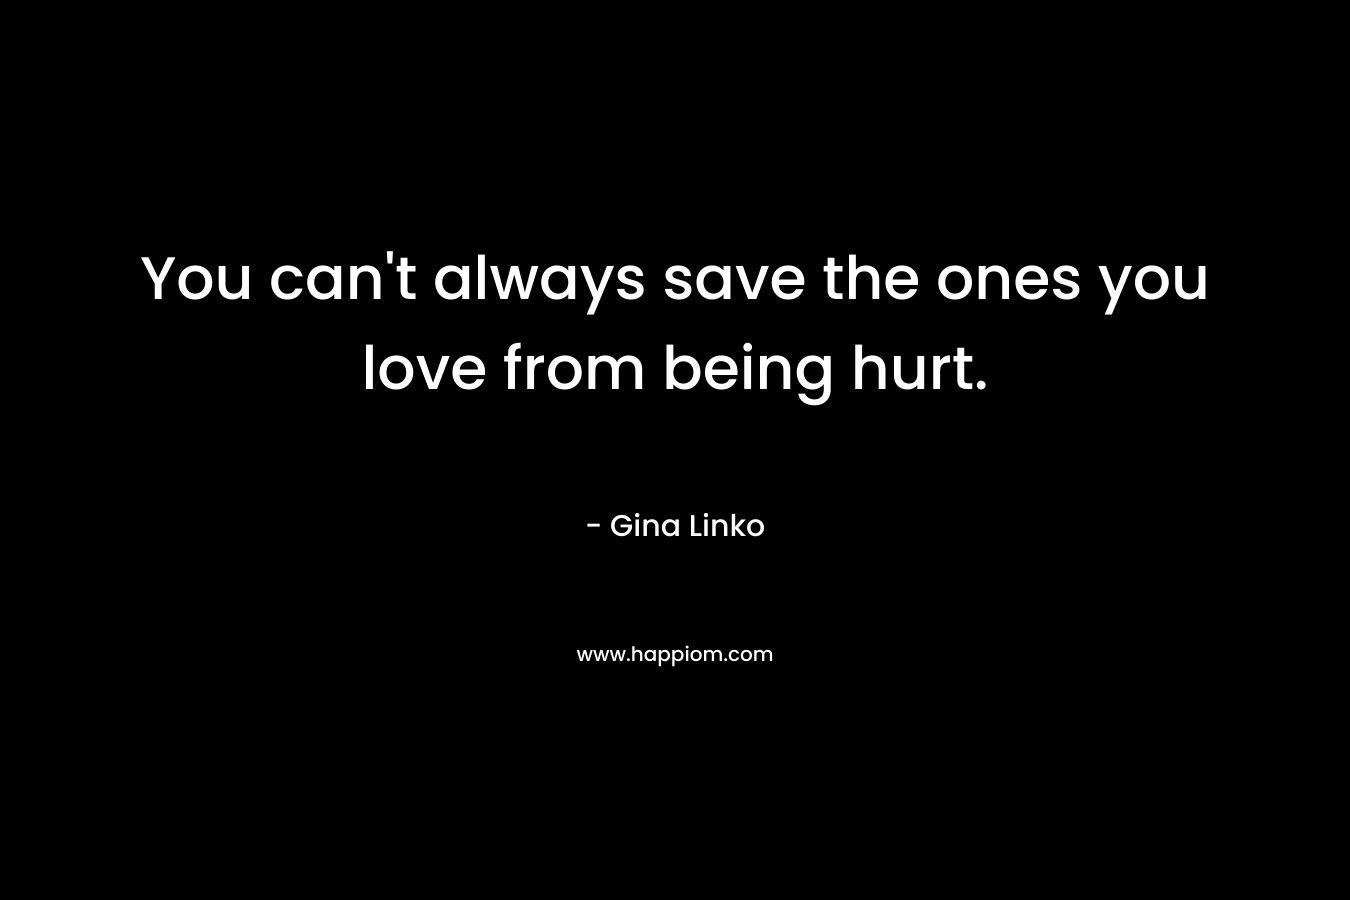 You can’t always save the ones you love from being hurt. – Gina Linko